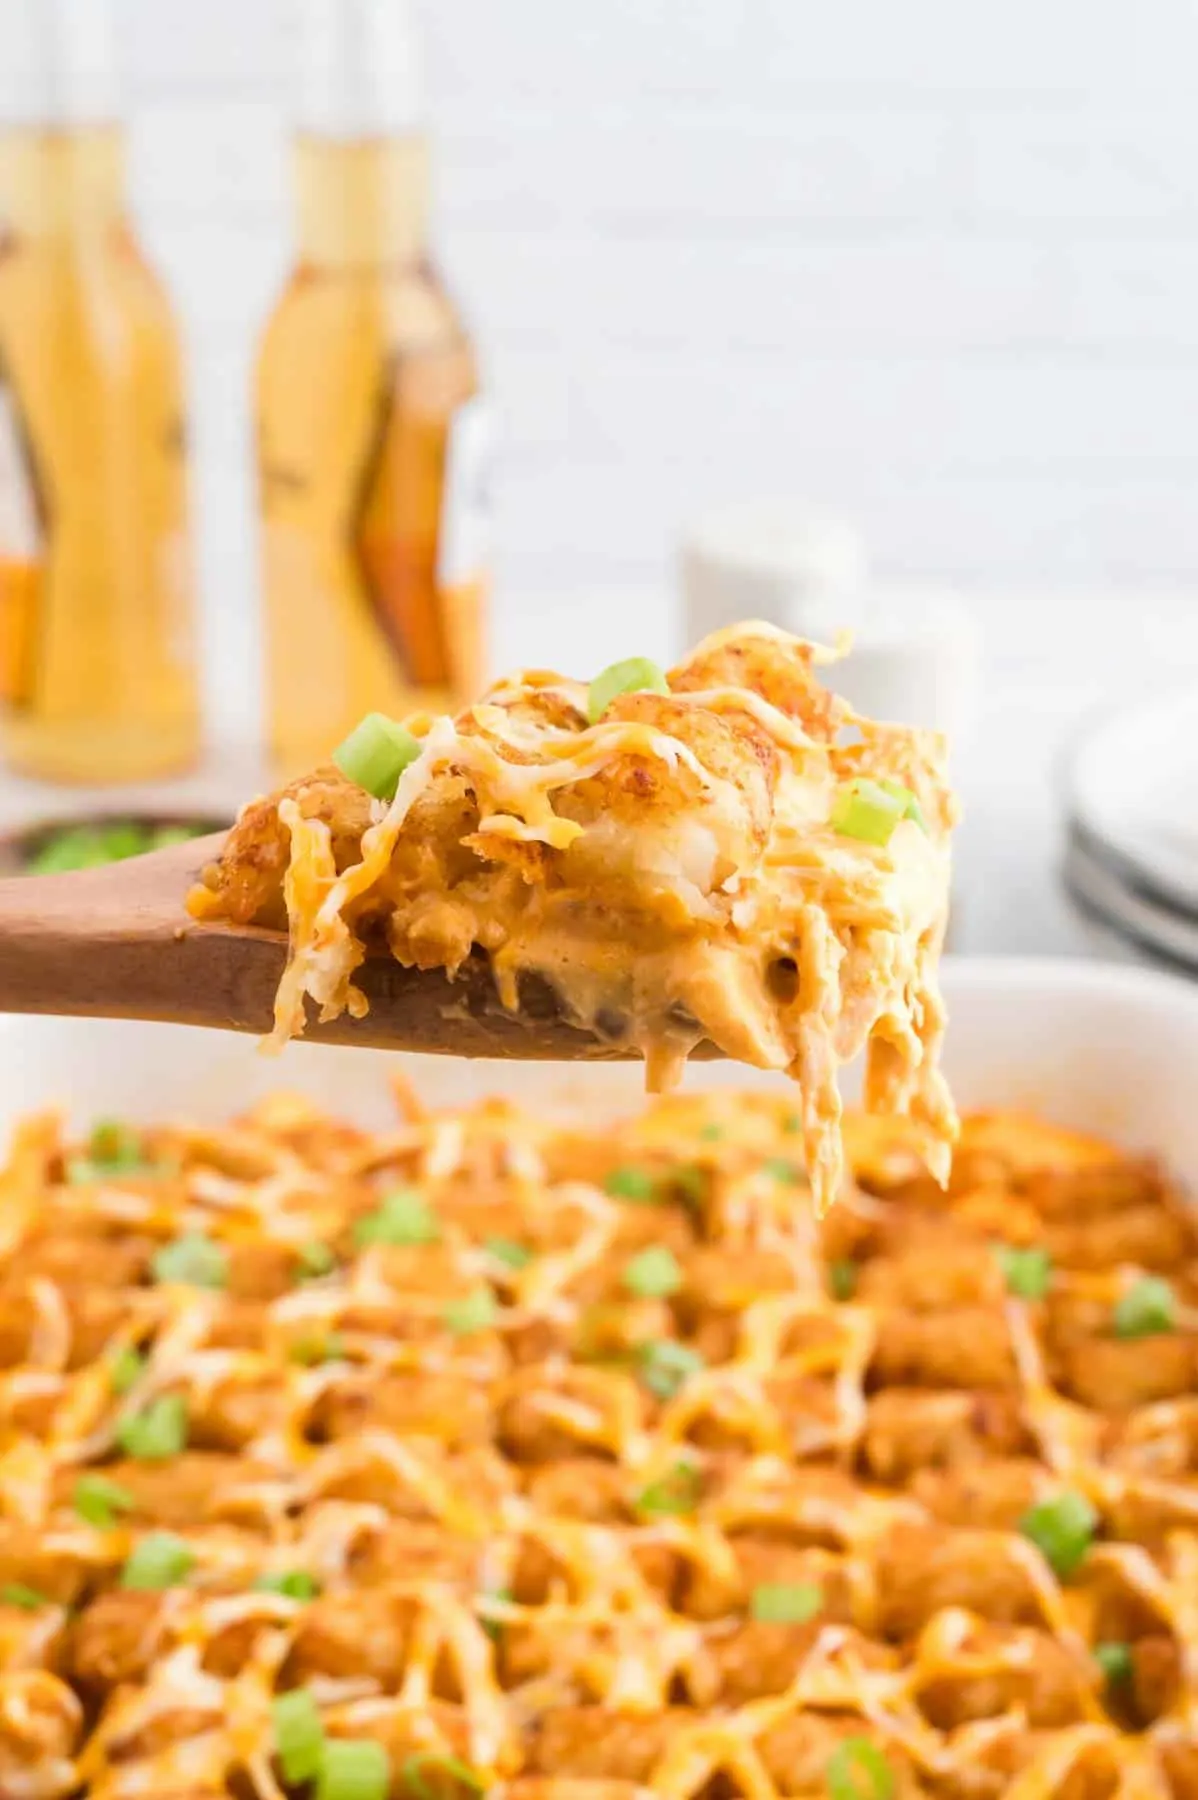 Buffalo Chicken Tater Tot Casserole is an easy family friendly dinner recipe  loaded with rotisserie chicken, cream of chicken soup, cream cheese, ranch dressing, Frank's Red Hot, tater tots, shredded cheese and chopped green onions.